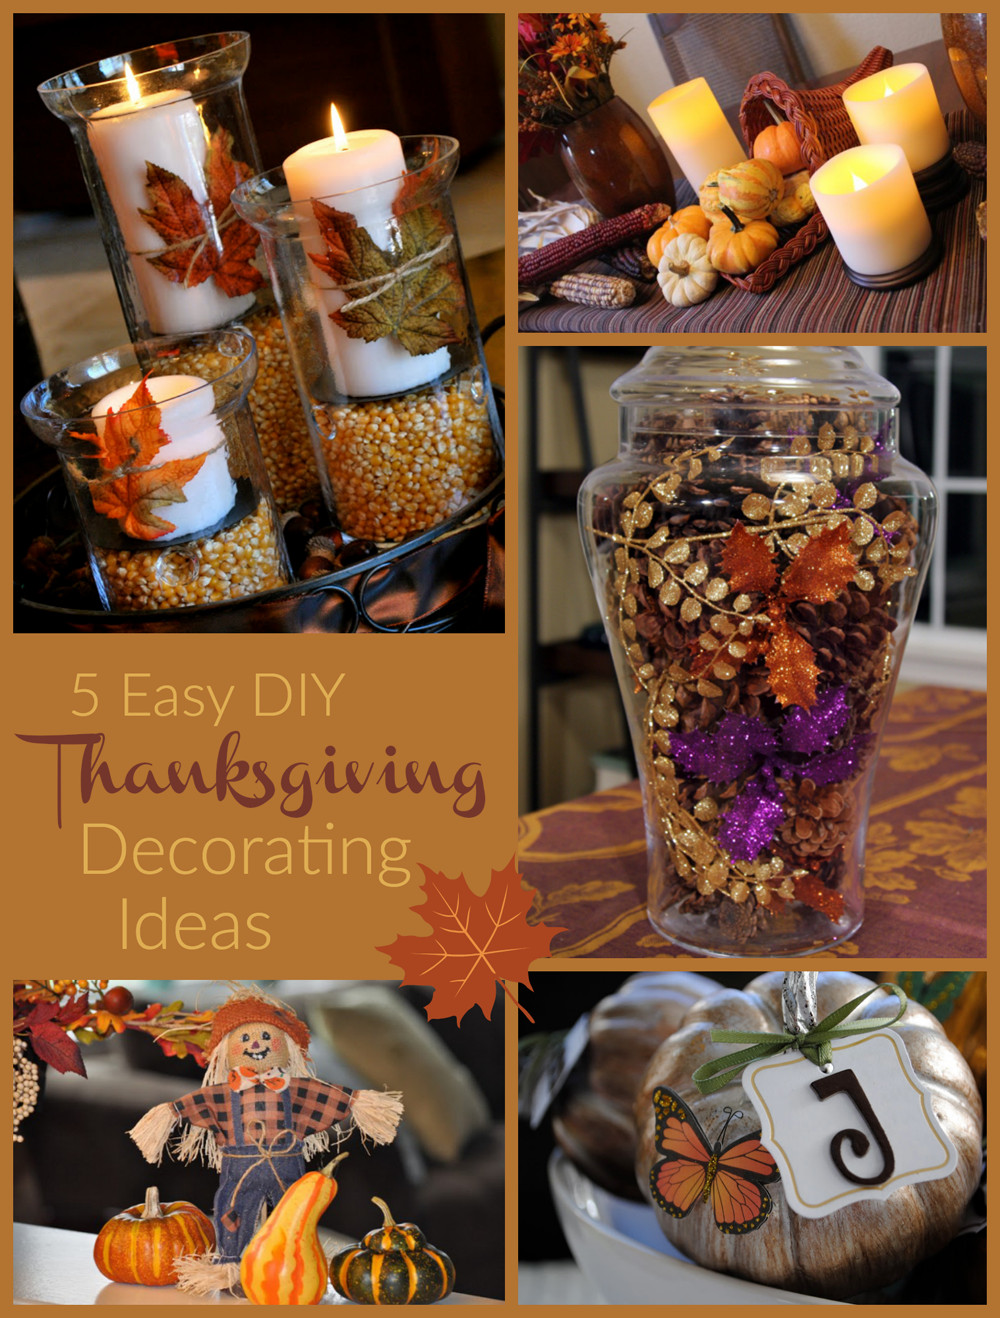 Simple Thanksgiving Table Decorations
 Easy Thanksgiving Decorating Ideas